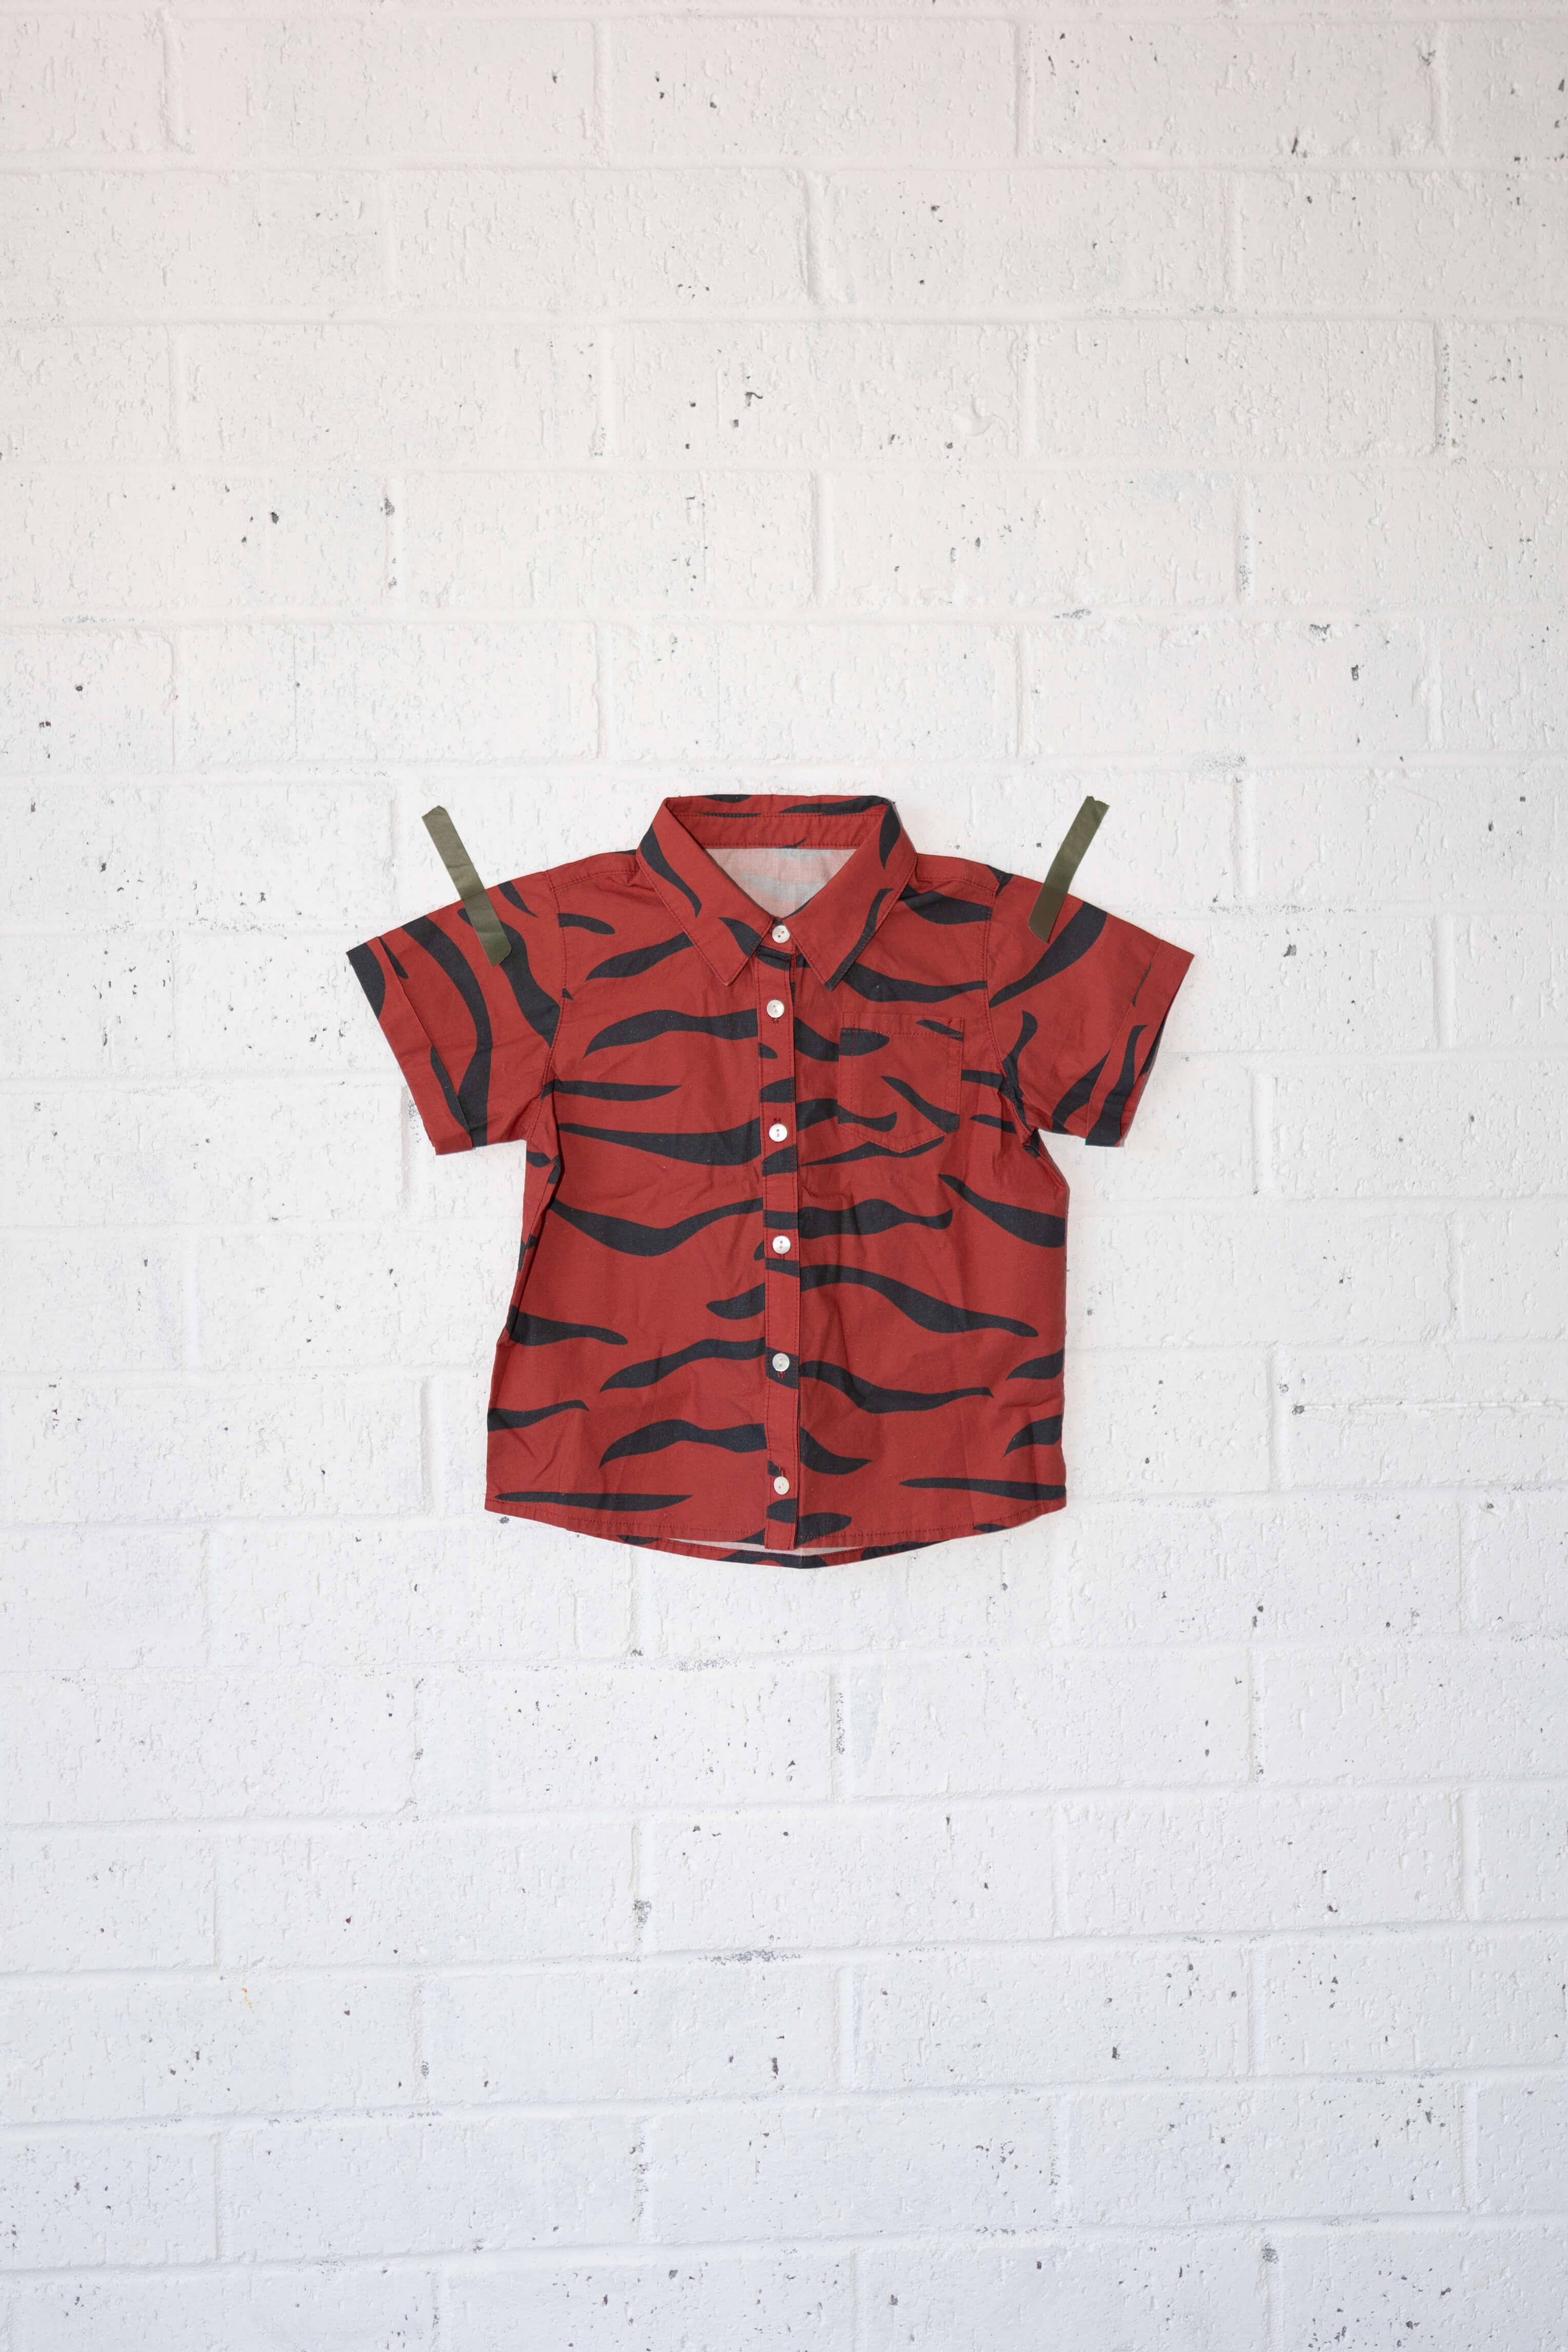 easy tiger rusty red short sleeve shirt - Lil Groms Kids Co